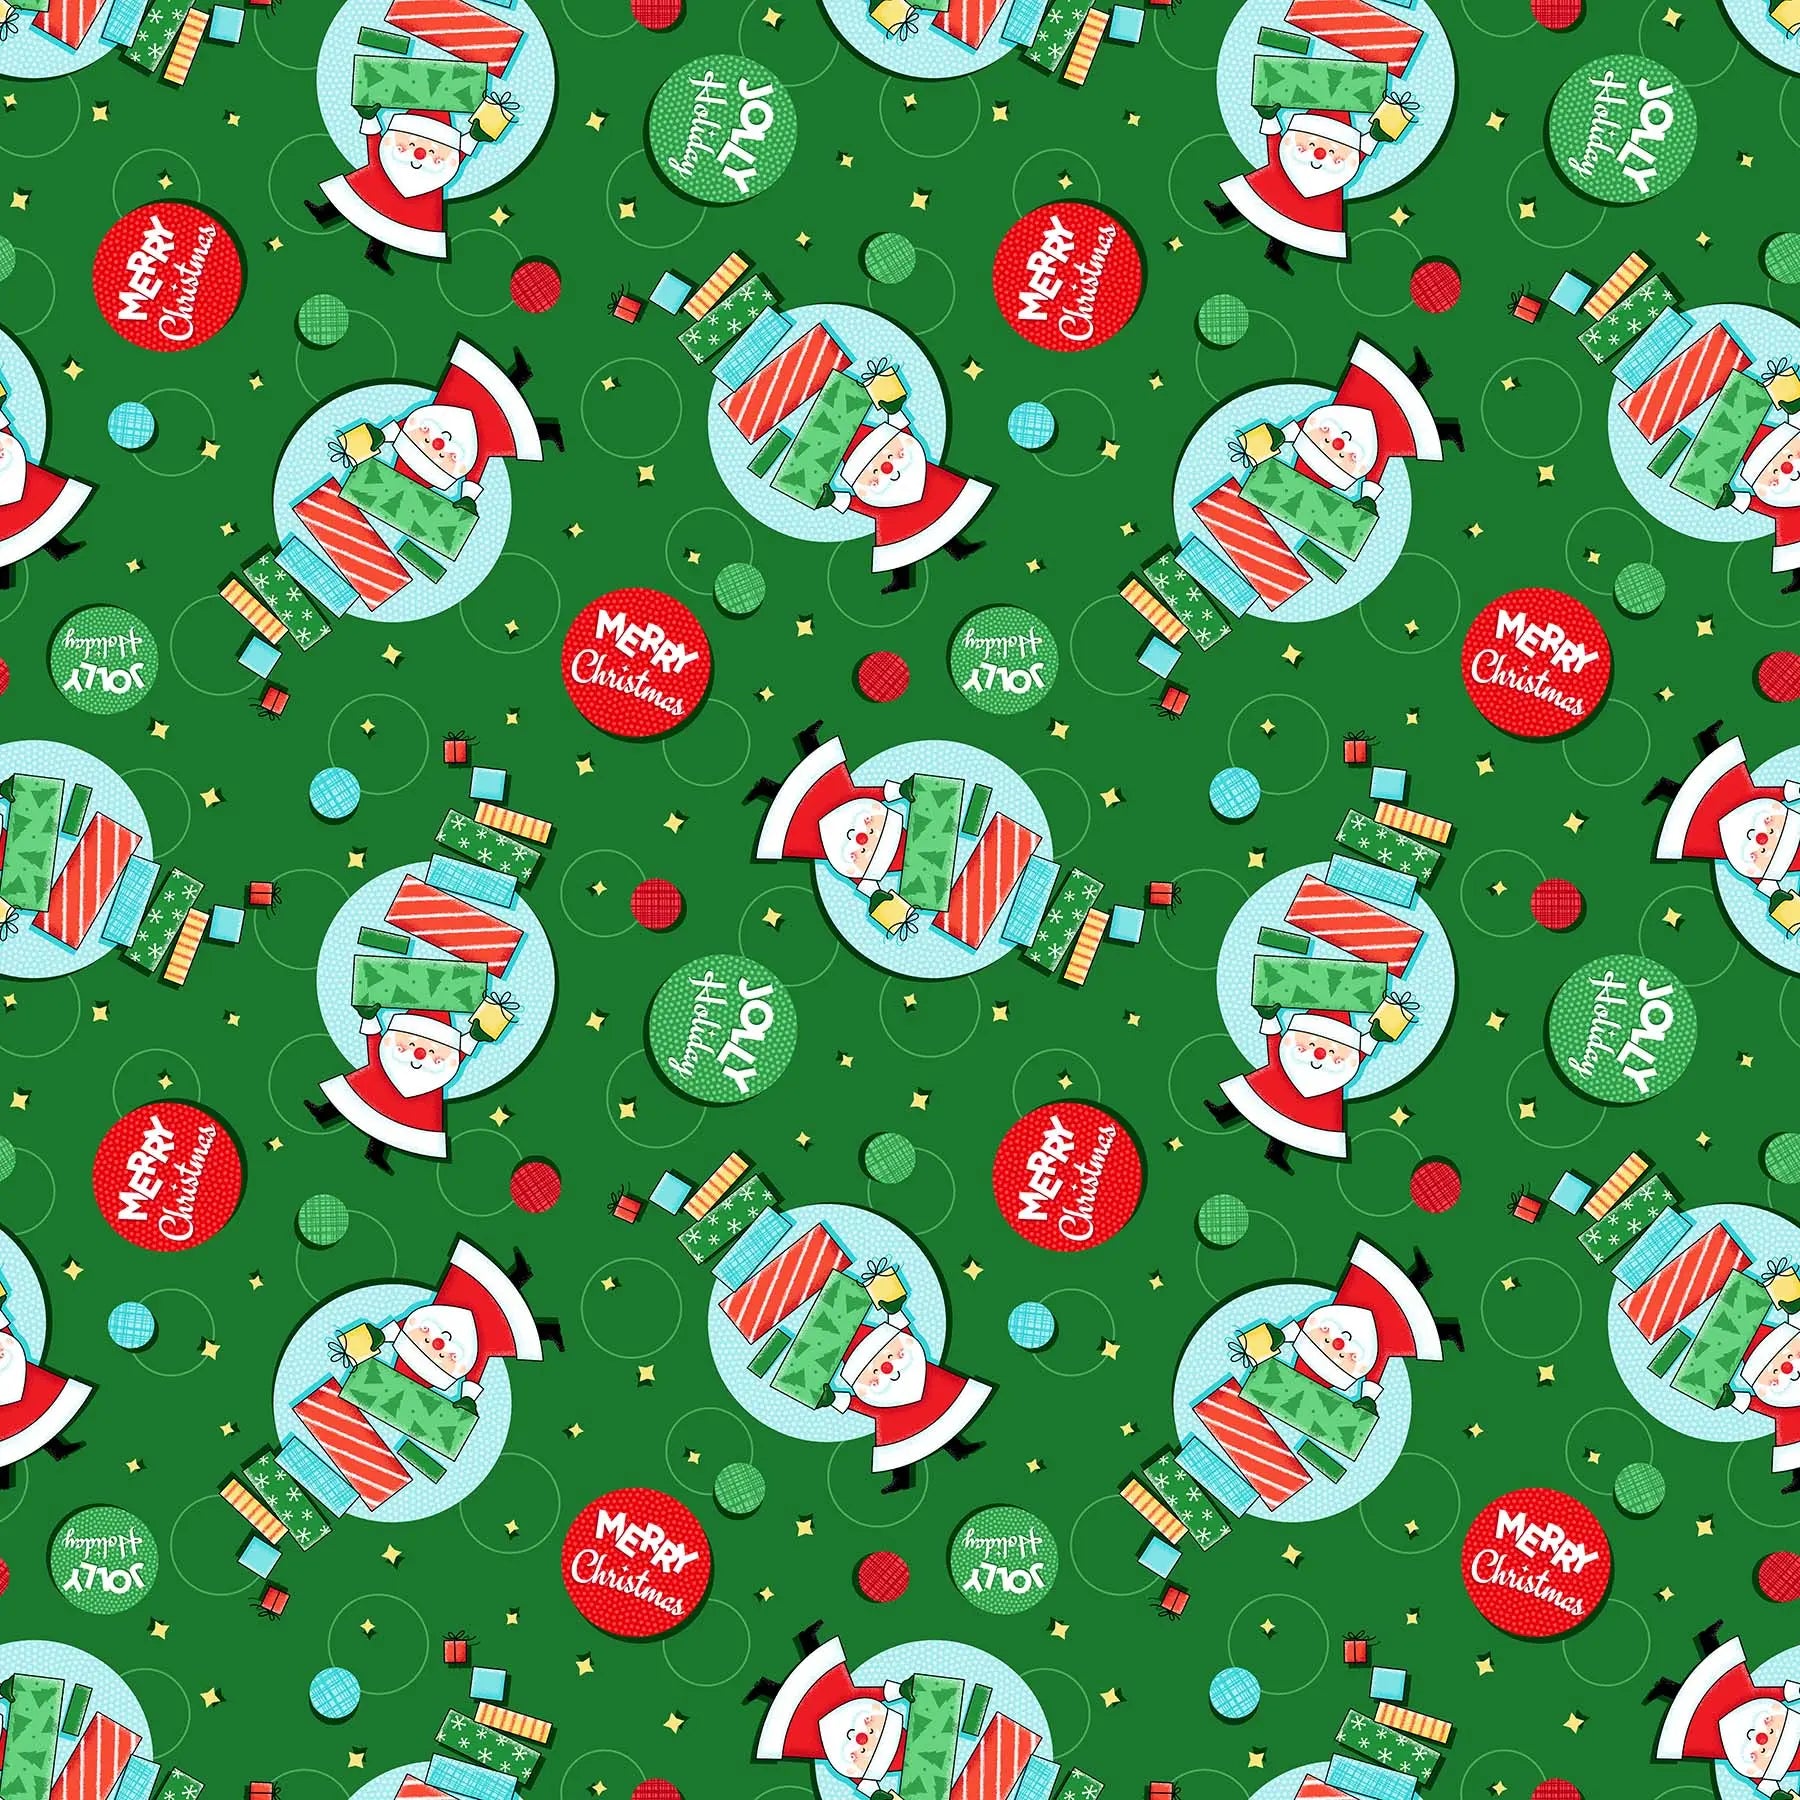 Green Holiday Spirit Cotton Fabric per yard - Linda's Electric Quilters